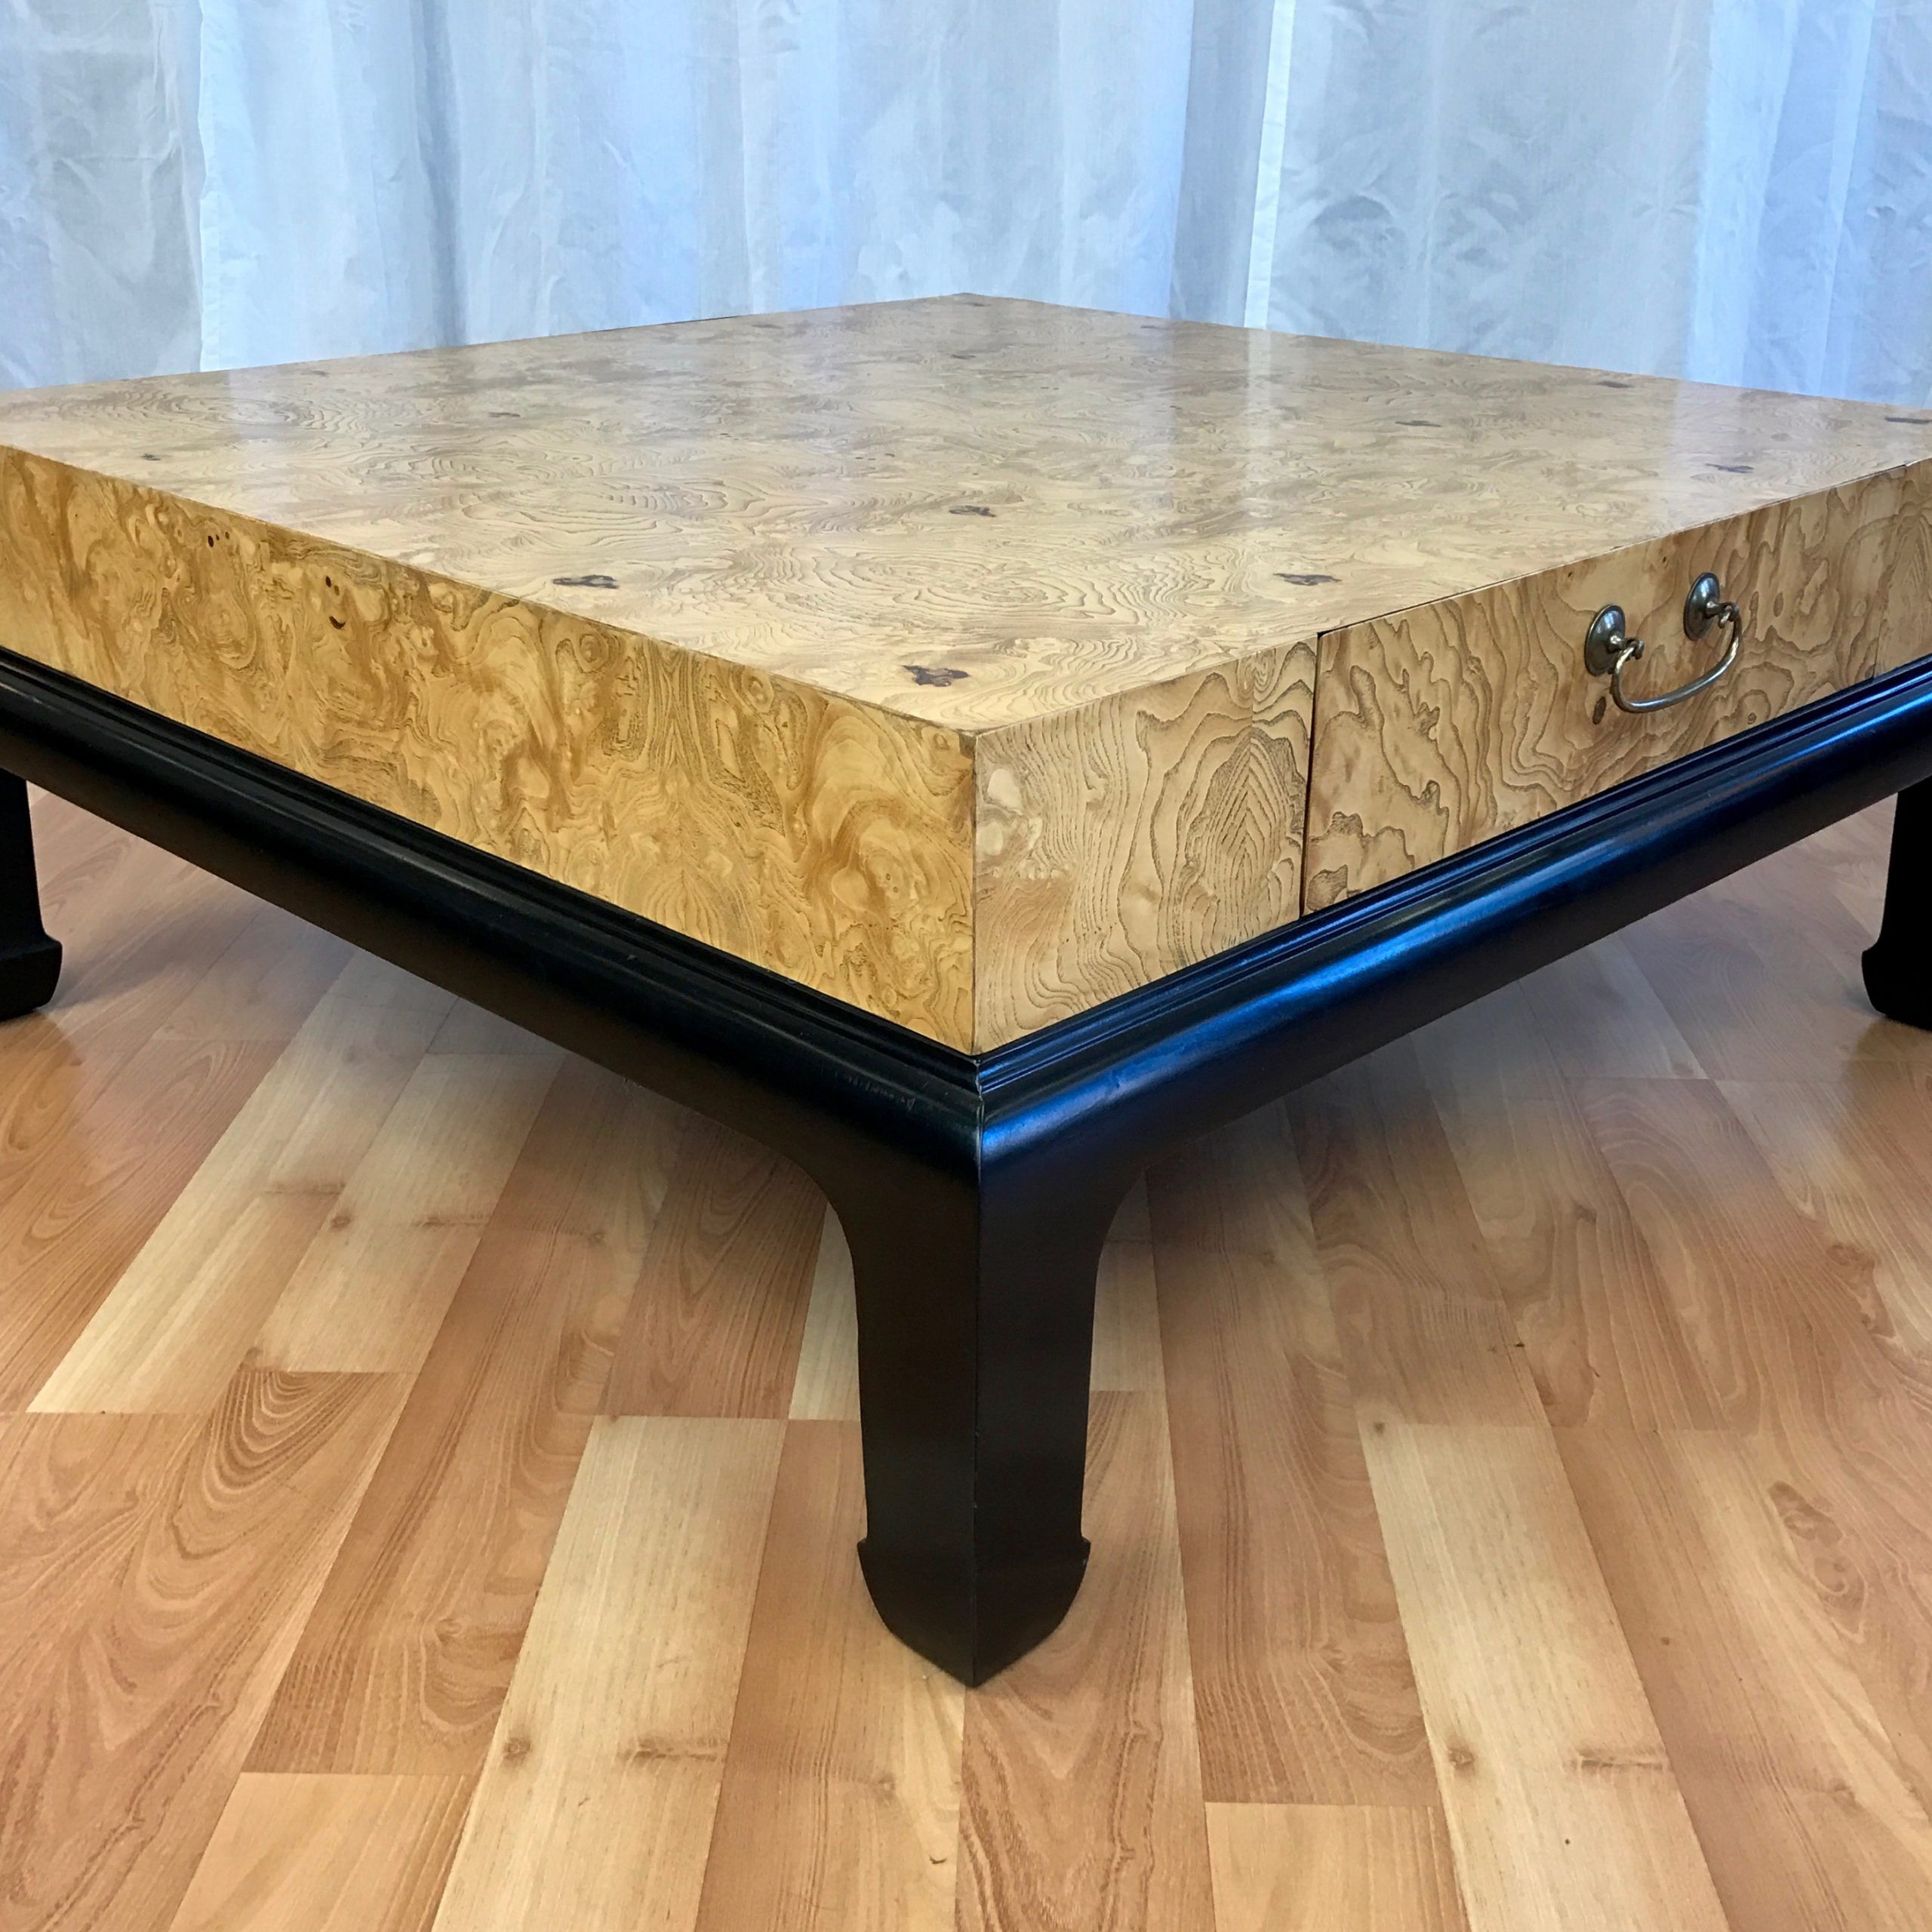 2019 Wood Veneer Coffee Tables With Large Burl Wood Coffee Table With Drawers Attributed To (View 9 of 20)